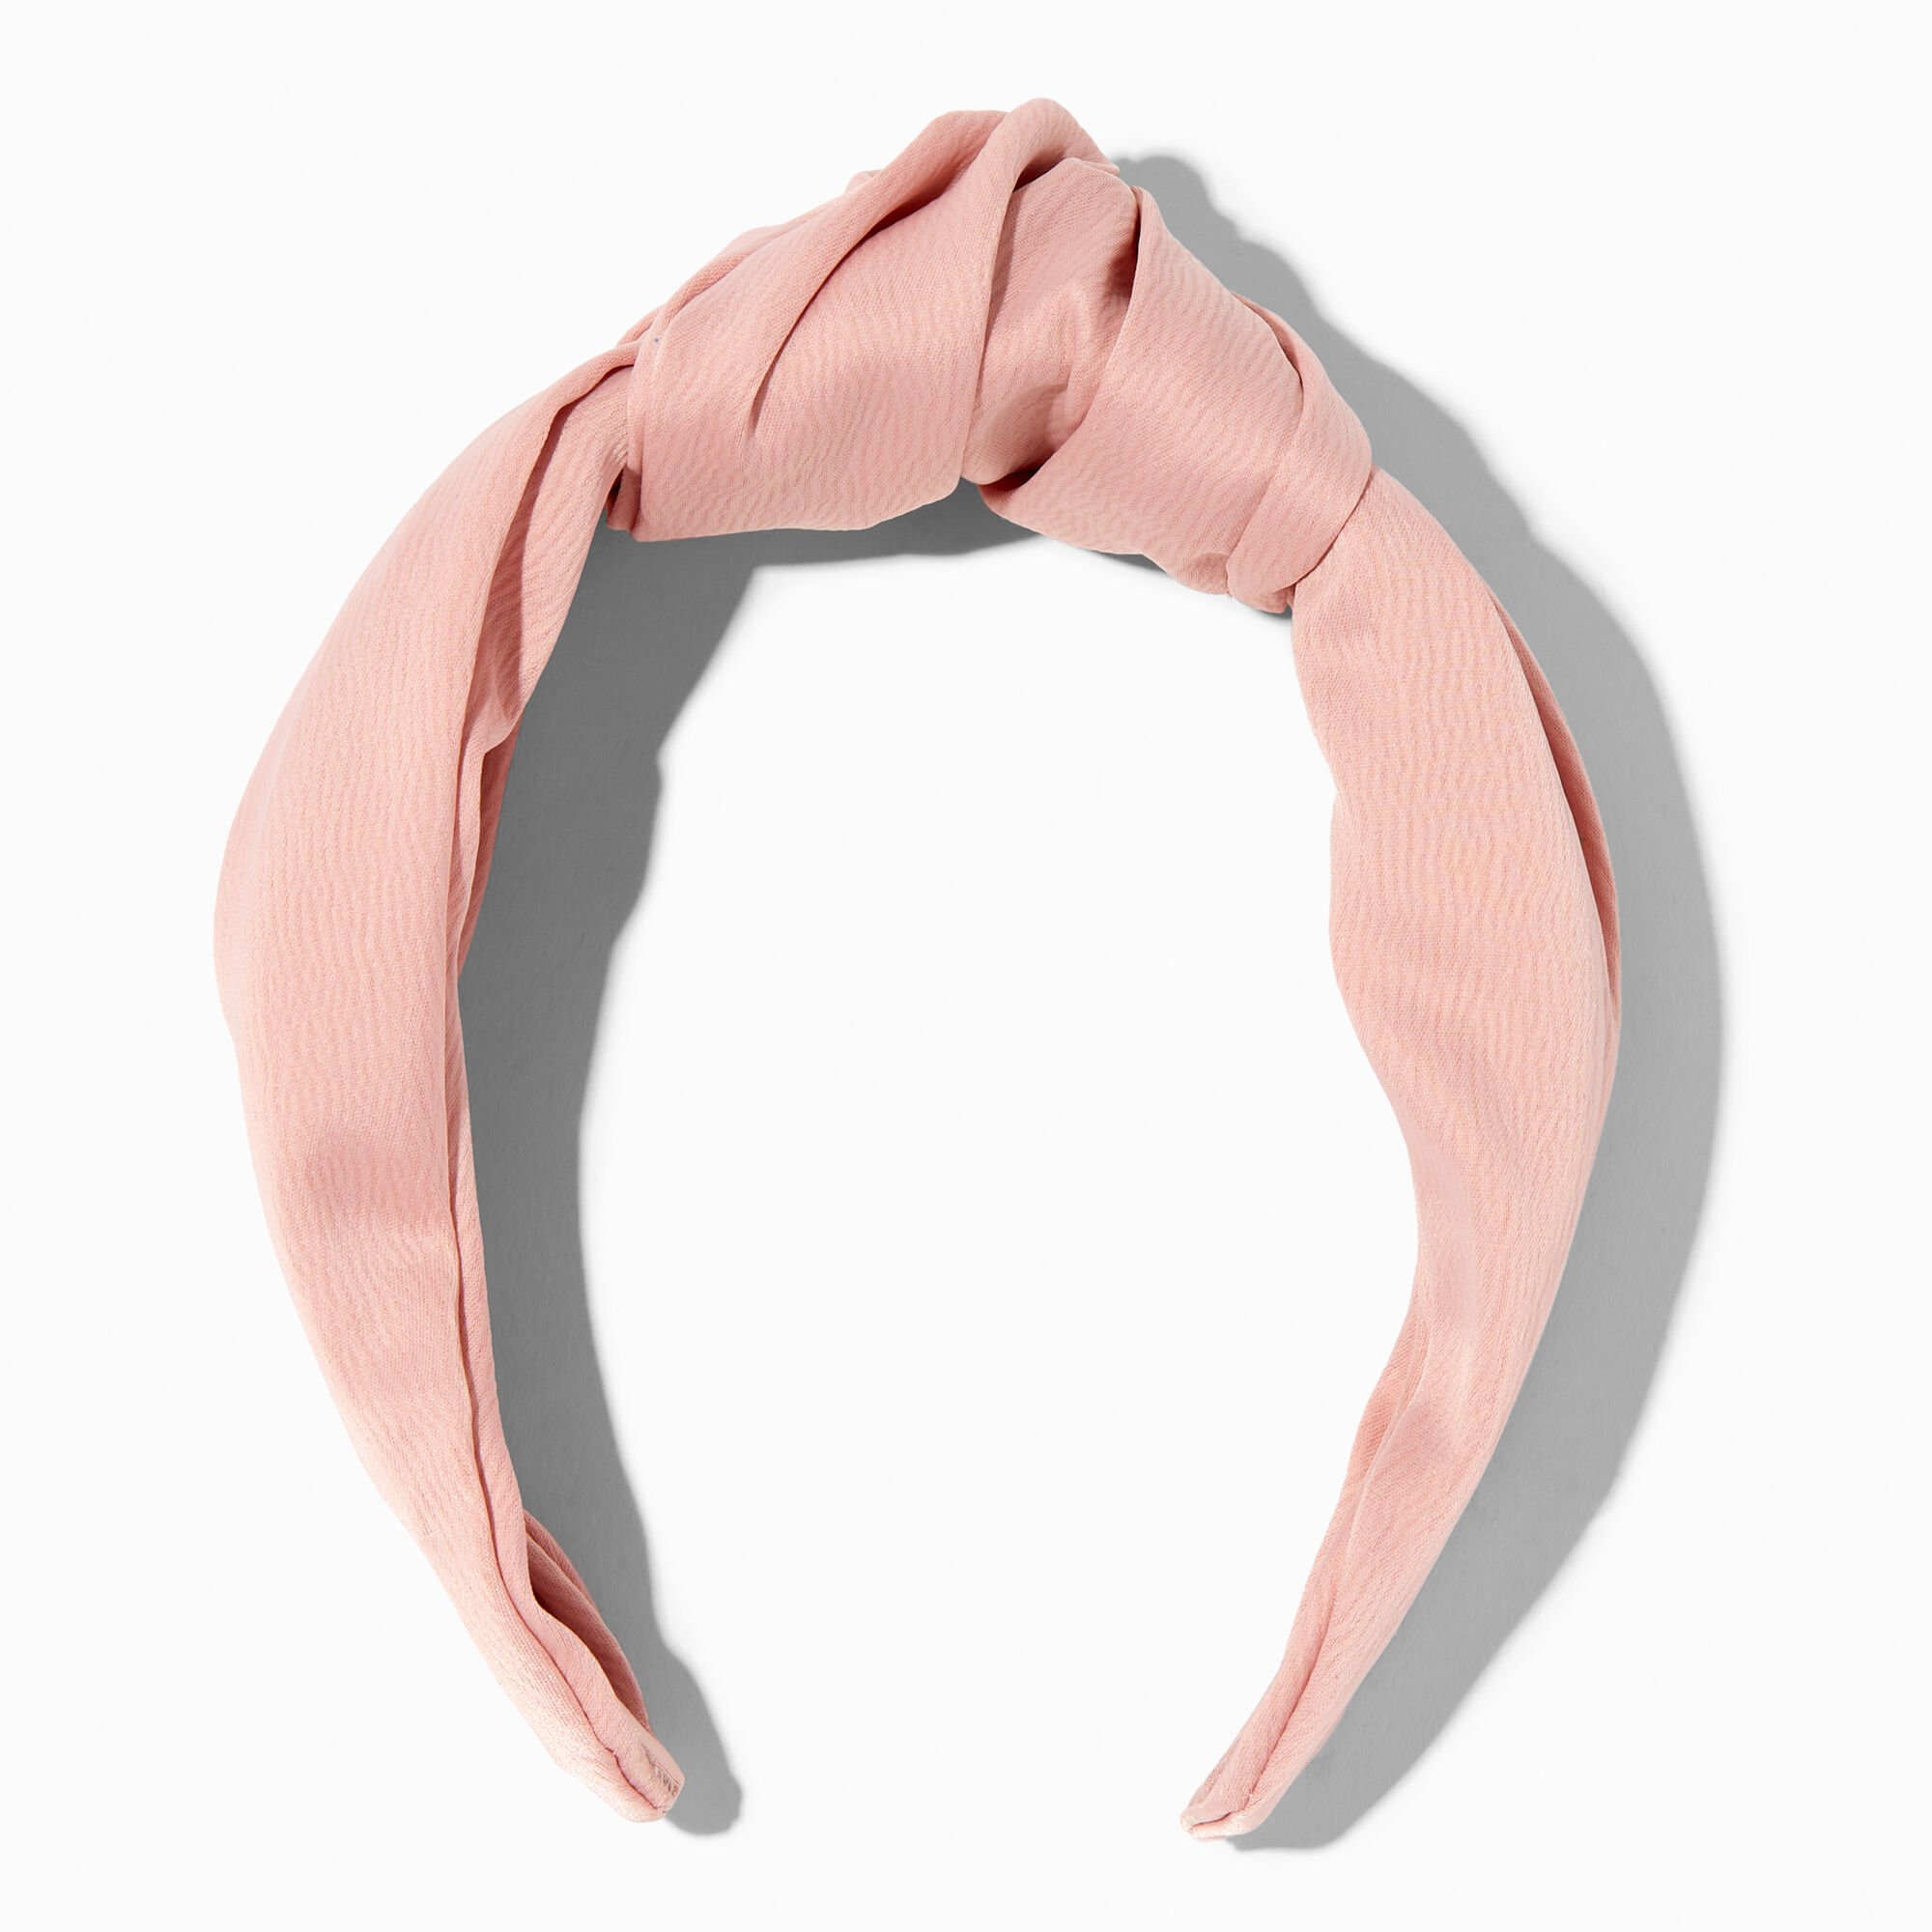 View Claires Blush Satin Knotted Headband Pink information